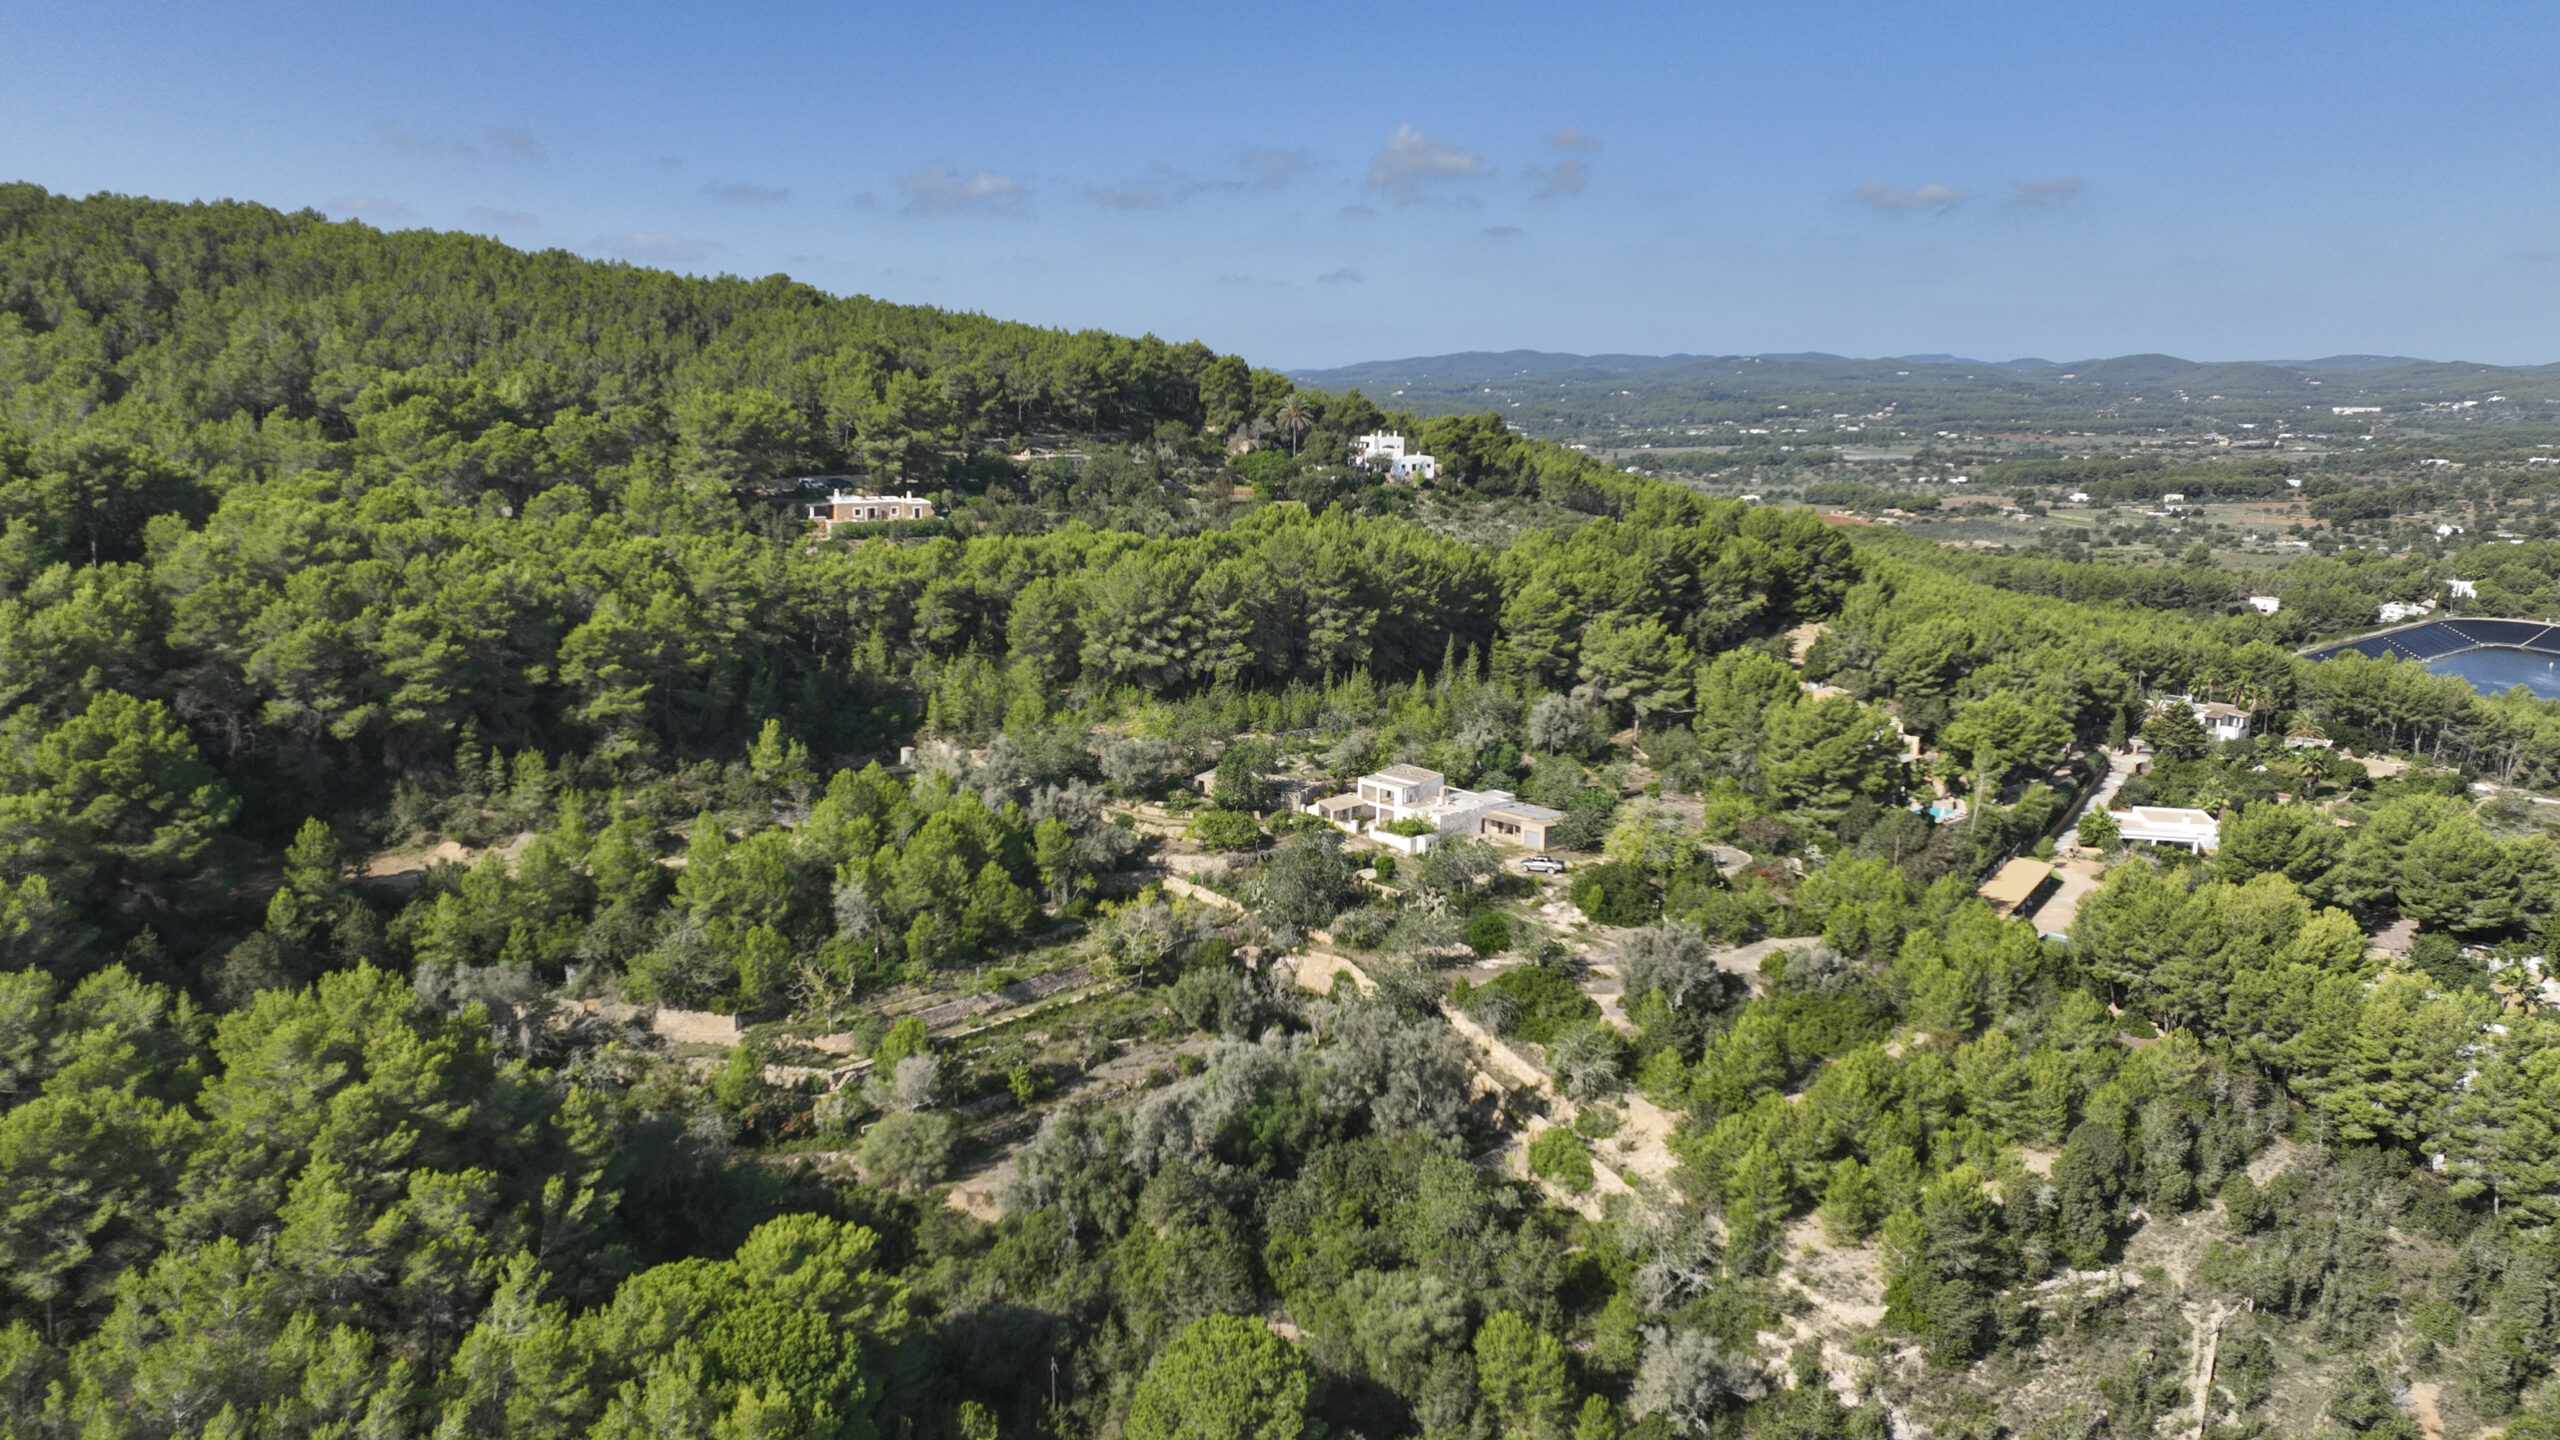 Aerial shot of a plot for sale jn Northeast Ibiza